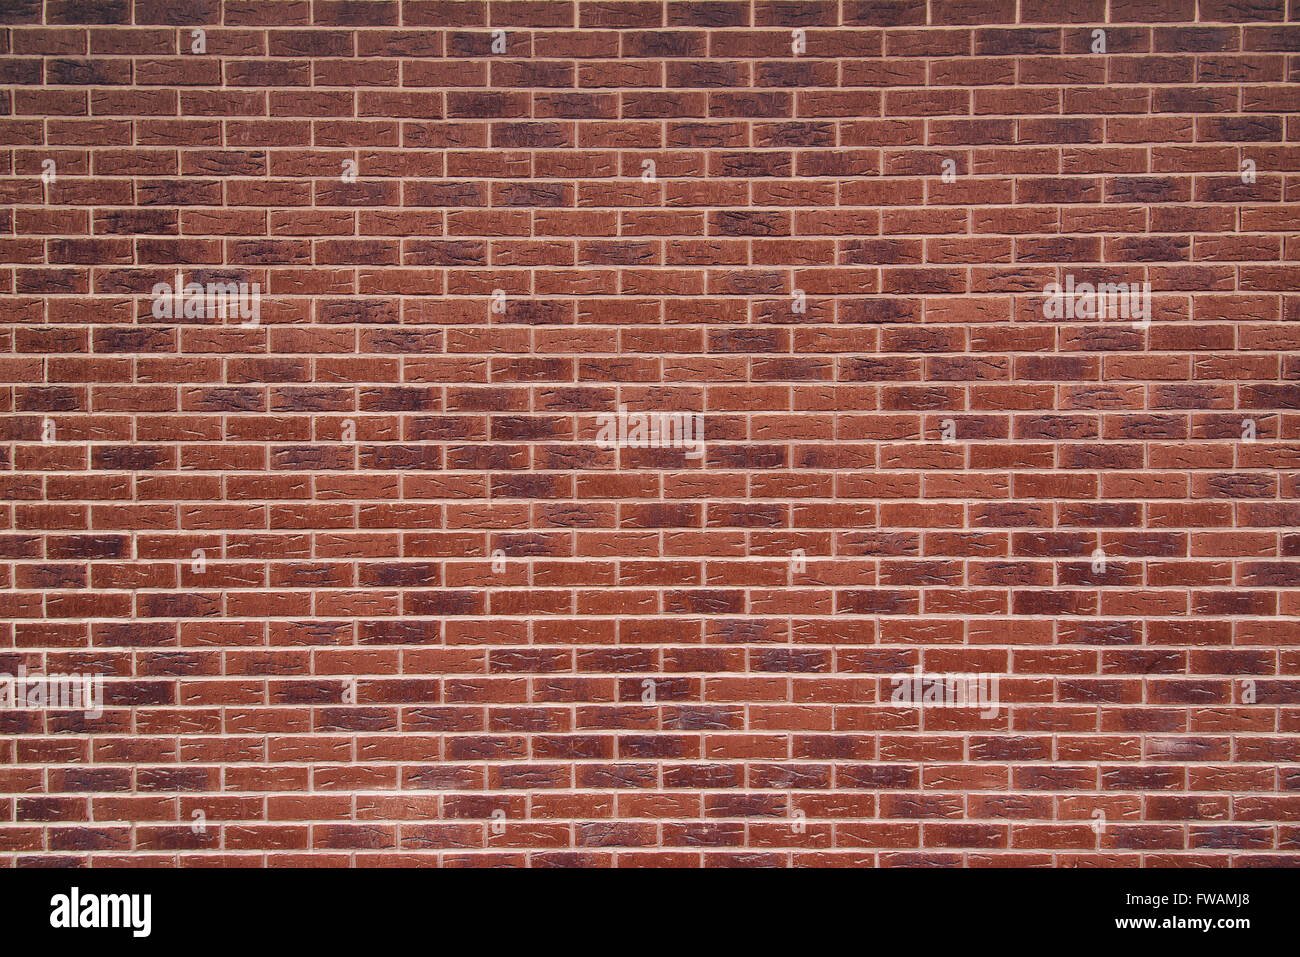 Exposed red vintage brick wall texture, brickwork pattern as background Stock Photo